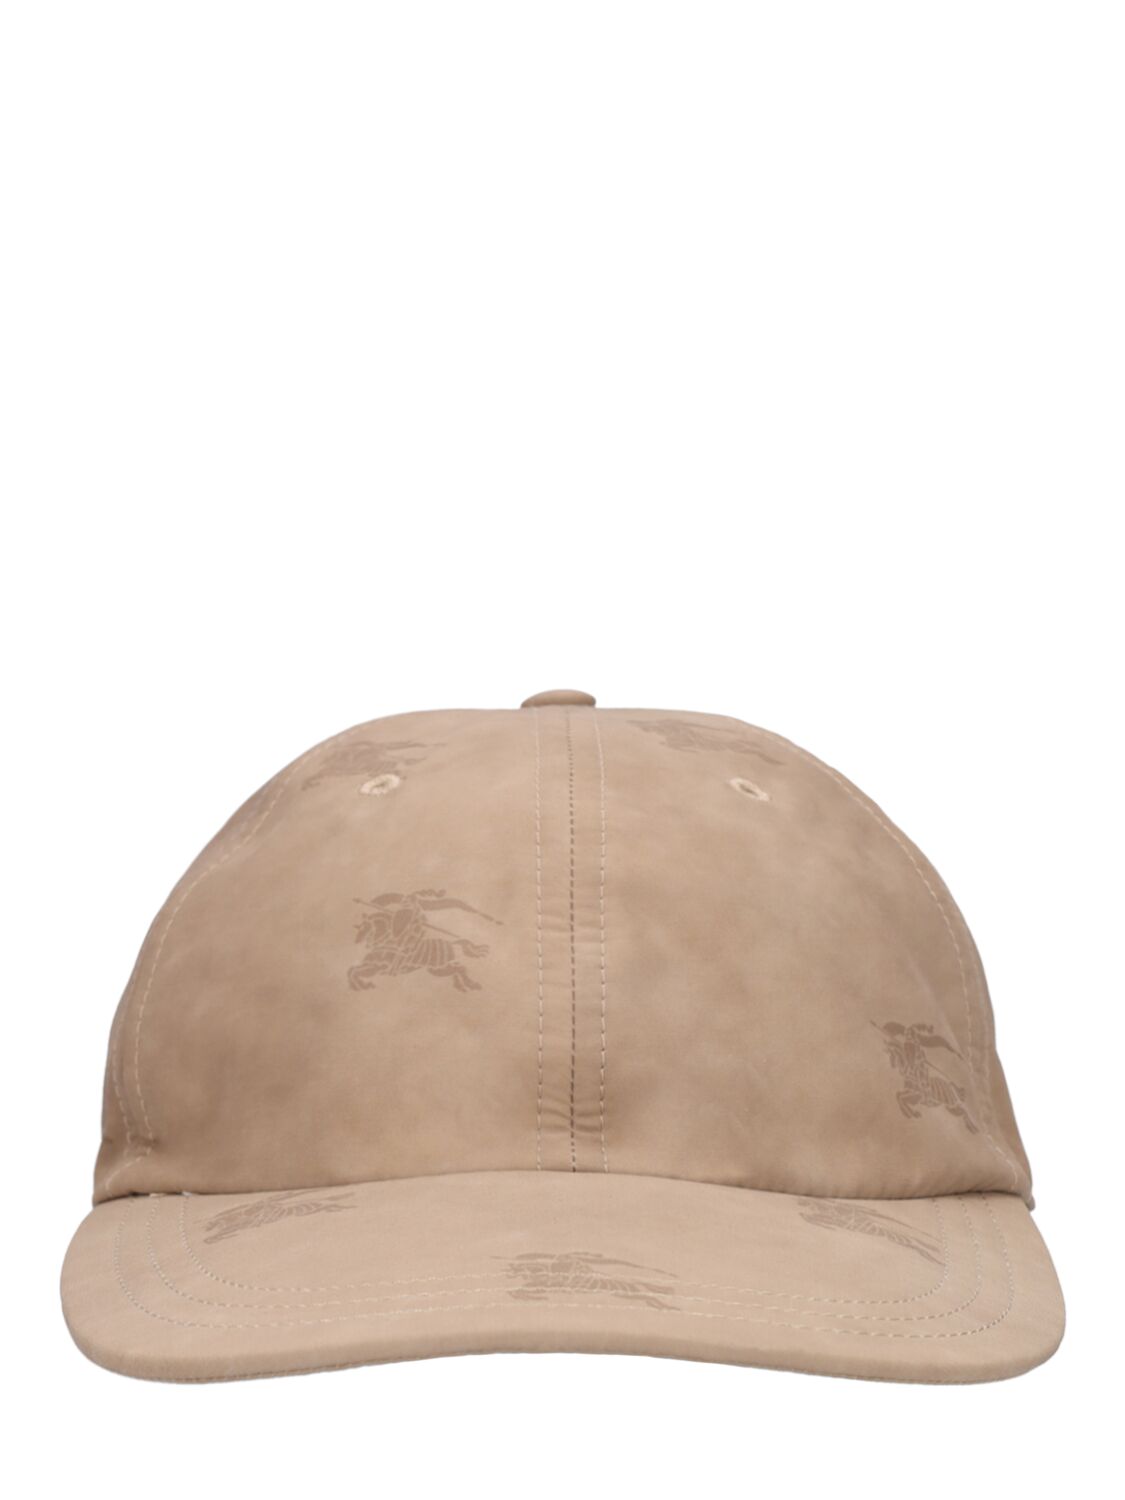 Burberry Knight Printed Cotton Baseball Cap In Soft Fawn